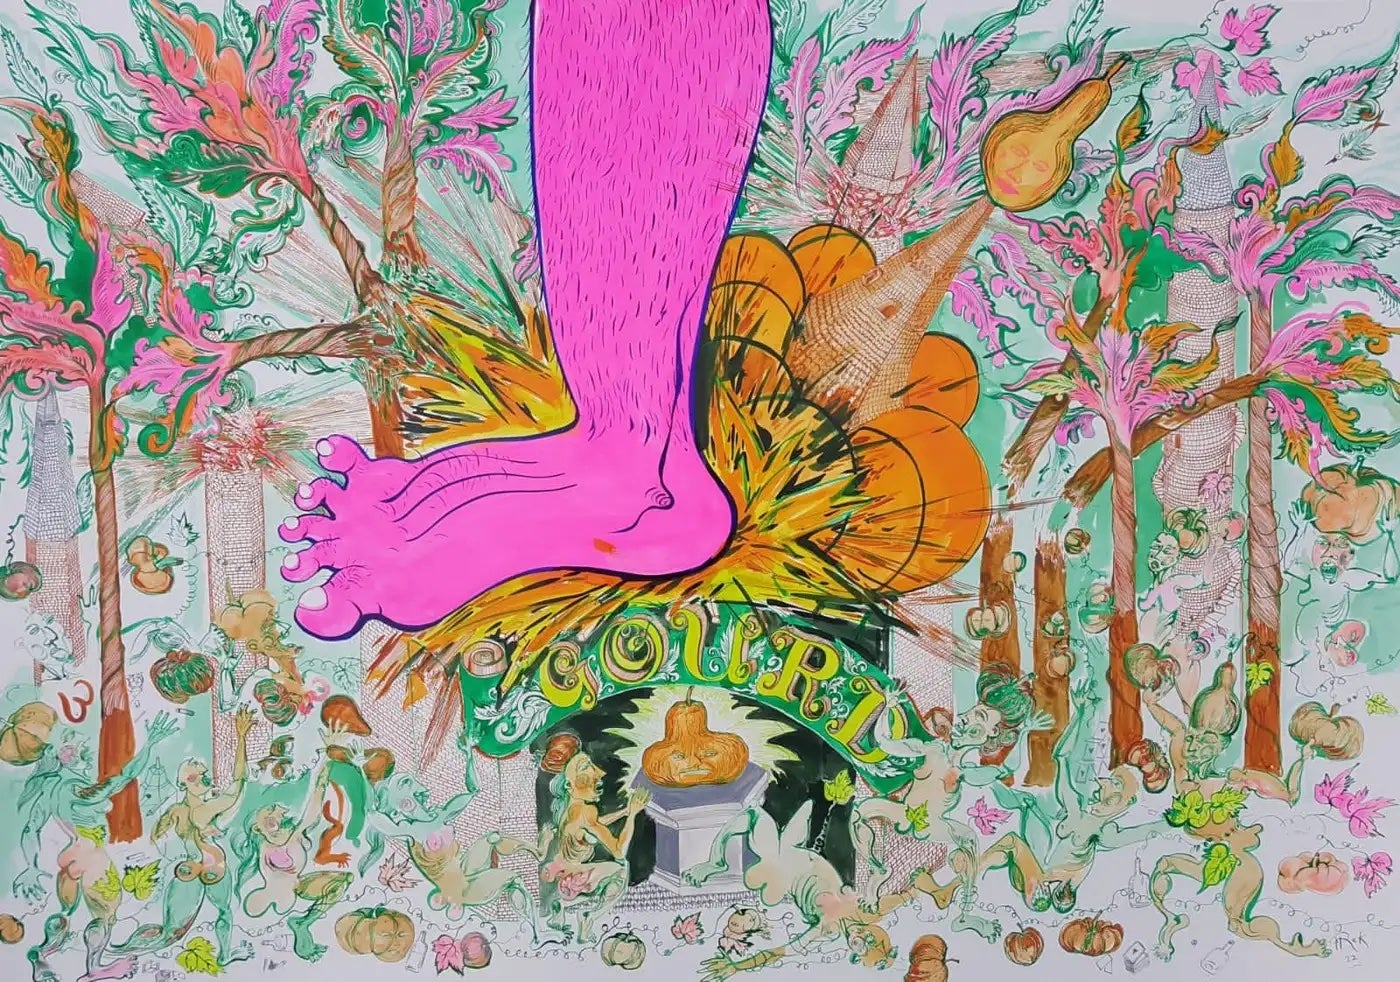 In This Surreal Painting, the Pink Foot of Patriarchy Squashes a Pumpkin Worshipped by Women